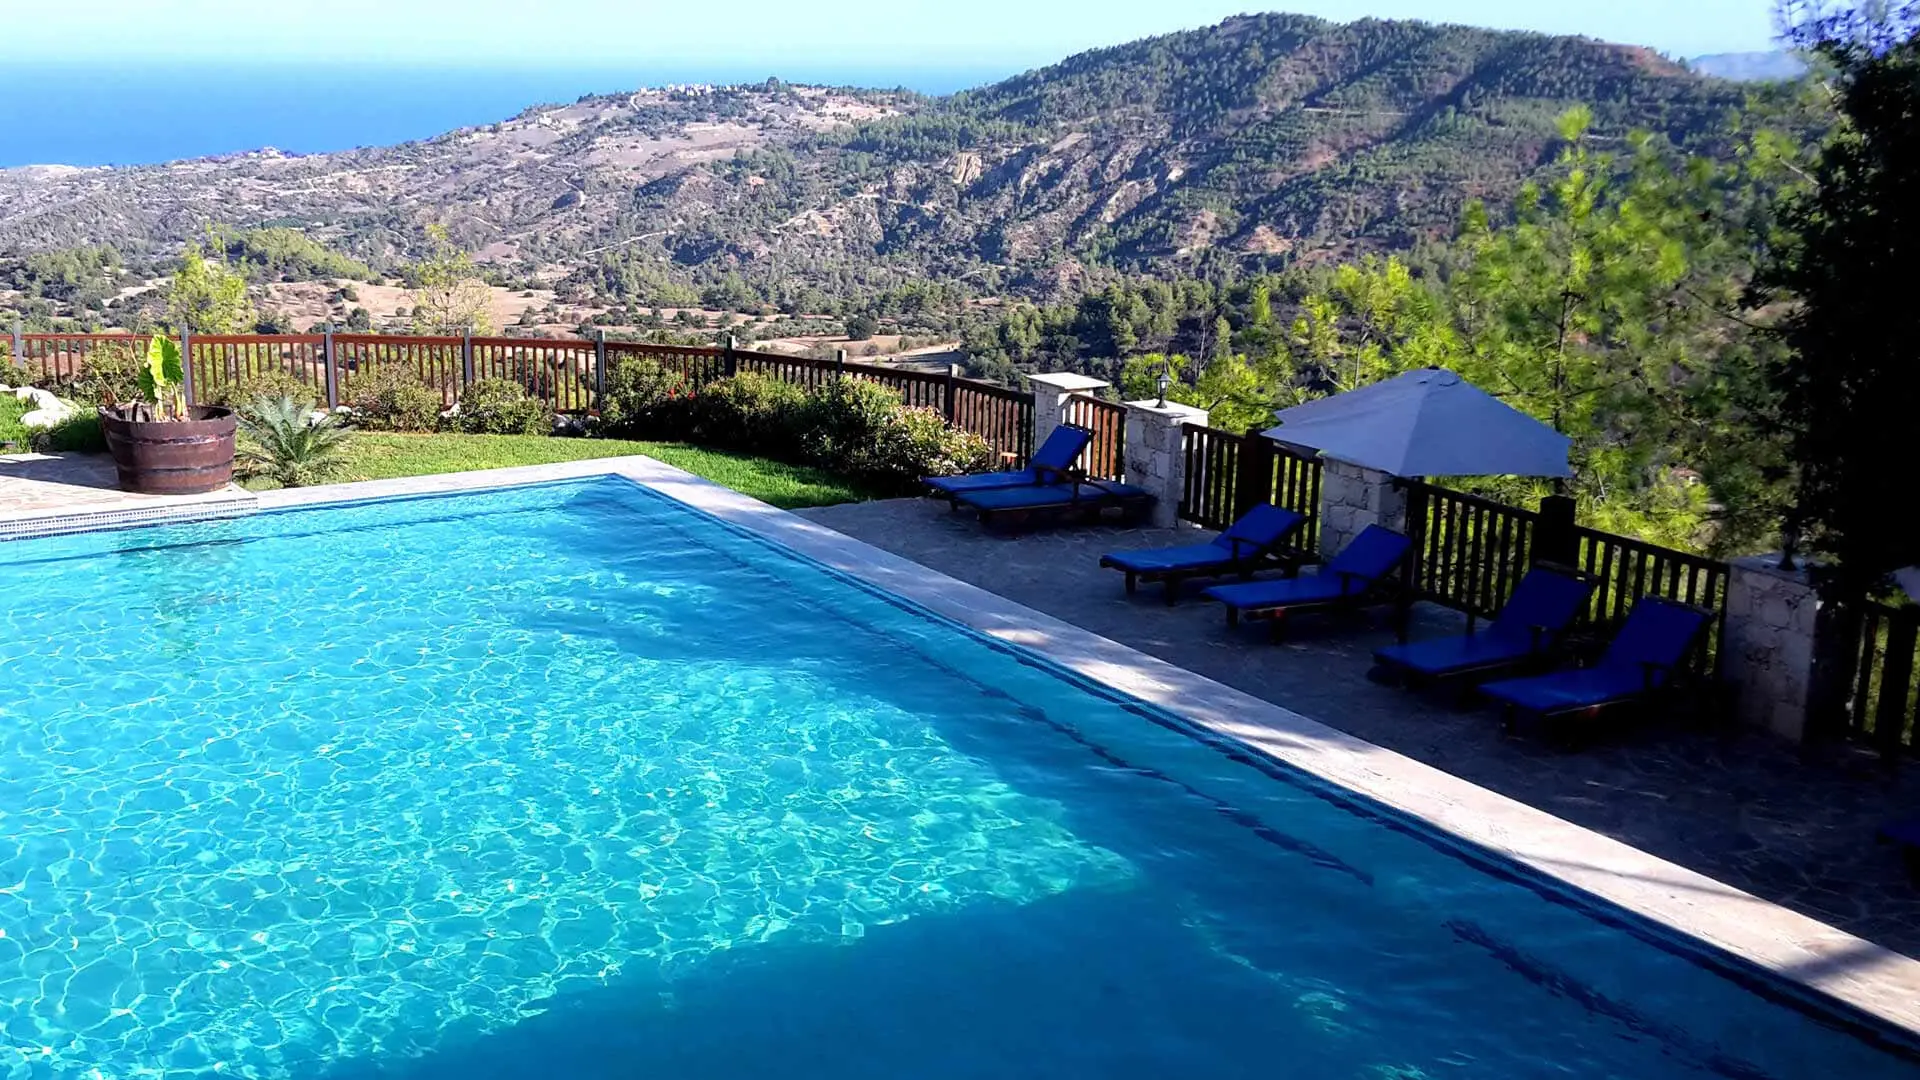  Paradisos Hotel & Retreat, Lysos - THE CYPRUS EXPERIENCE - Firefly Wellness Retreats - 7 NIGHT YOGA AND WELLNESS RETREAT. | JUNE 8th to 15th 2024 | Rediscovering Your Light - Telephone Bookings: +447800 974 996 or +357 99 289134  | Email:hello@fireflywellnessretreats.com  